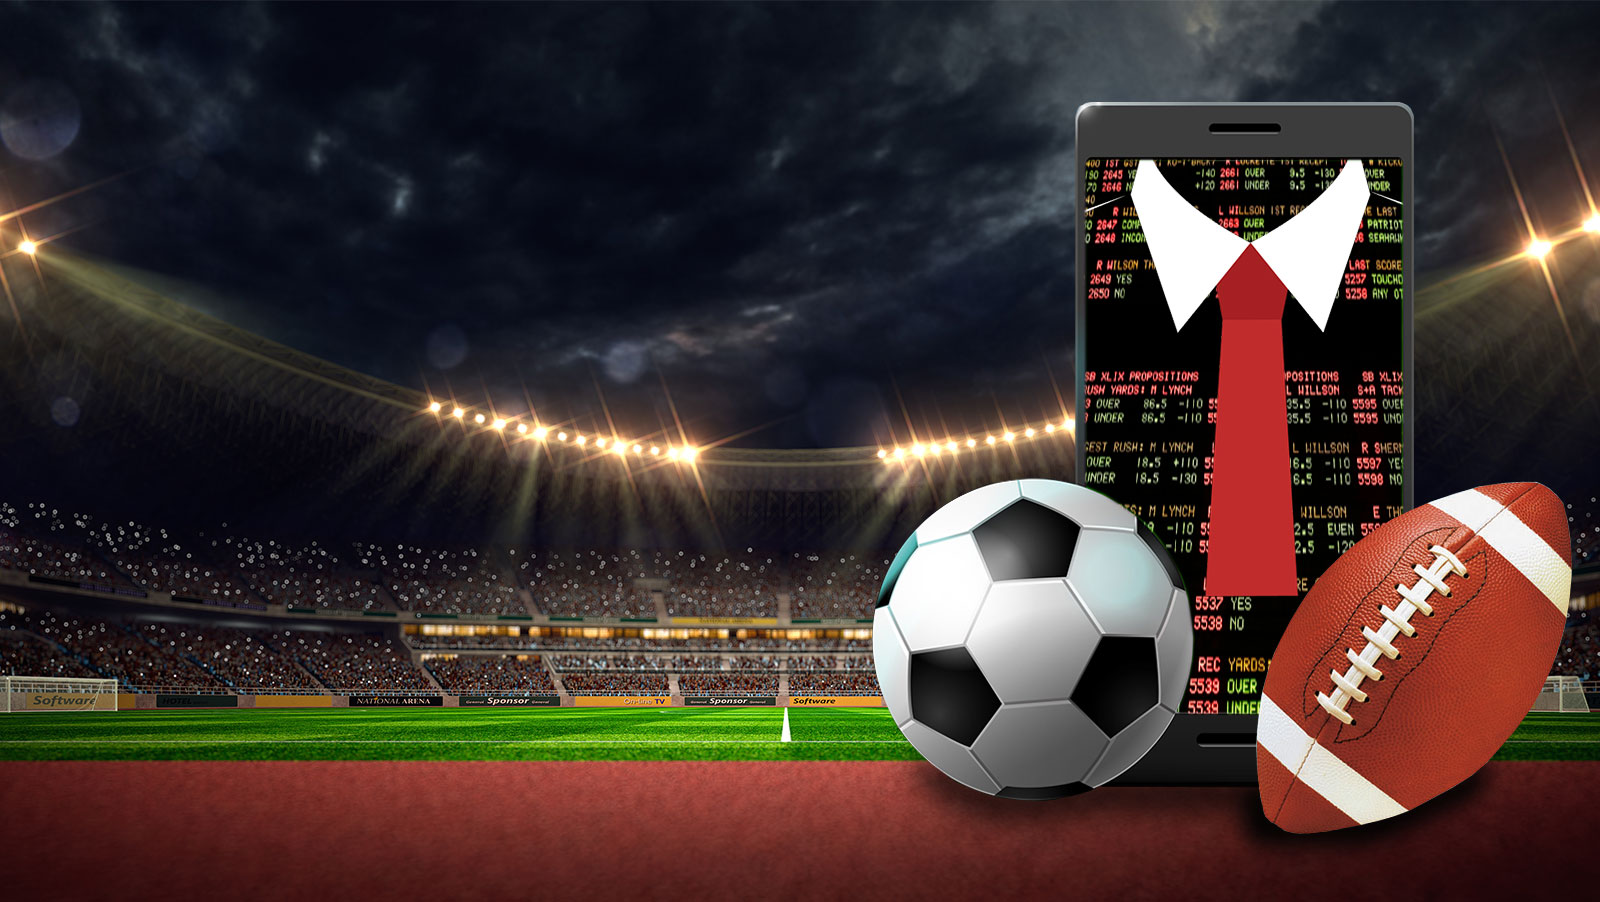 The professionalisation of sports betting